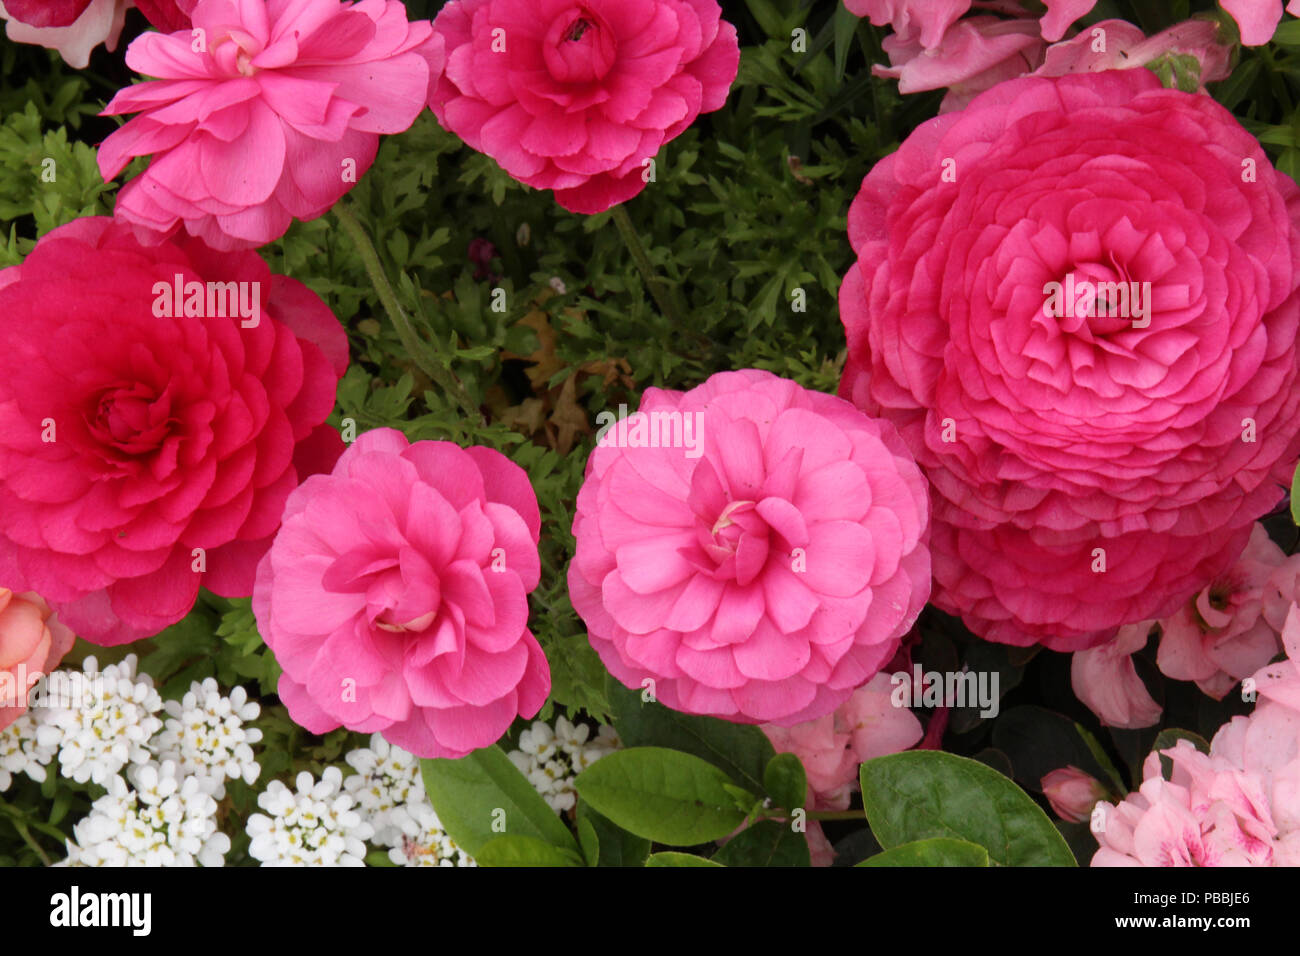 A top down view of a cluster of delicate, deep pink Ranunculus flowers in full bloom and small, white Candytuft flowers Stock Photo